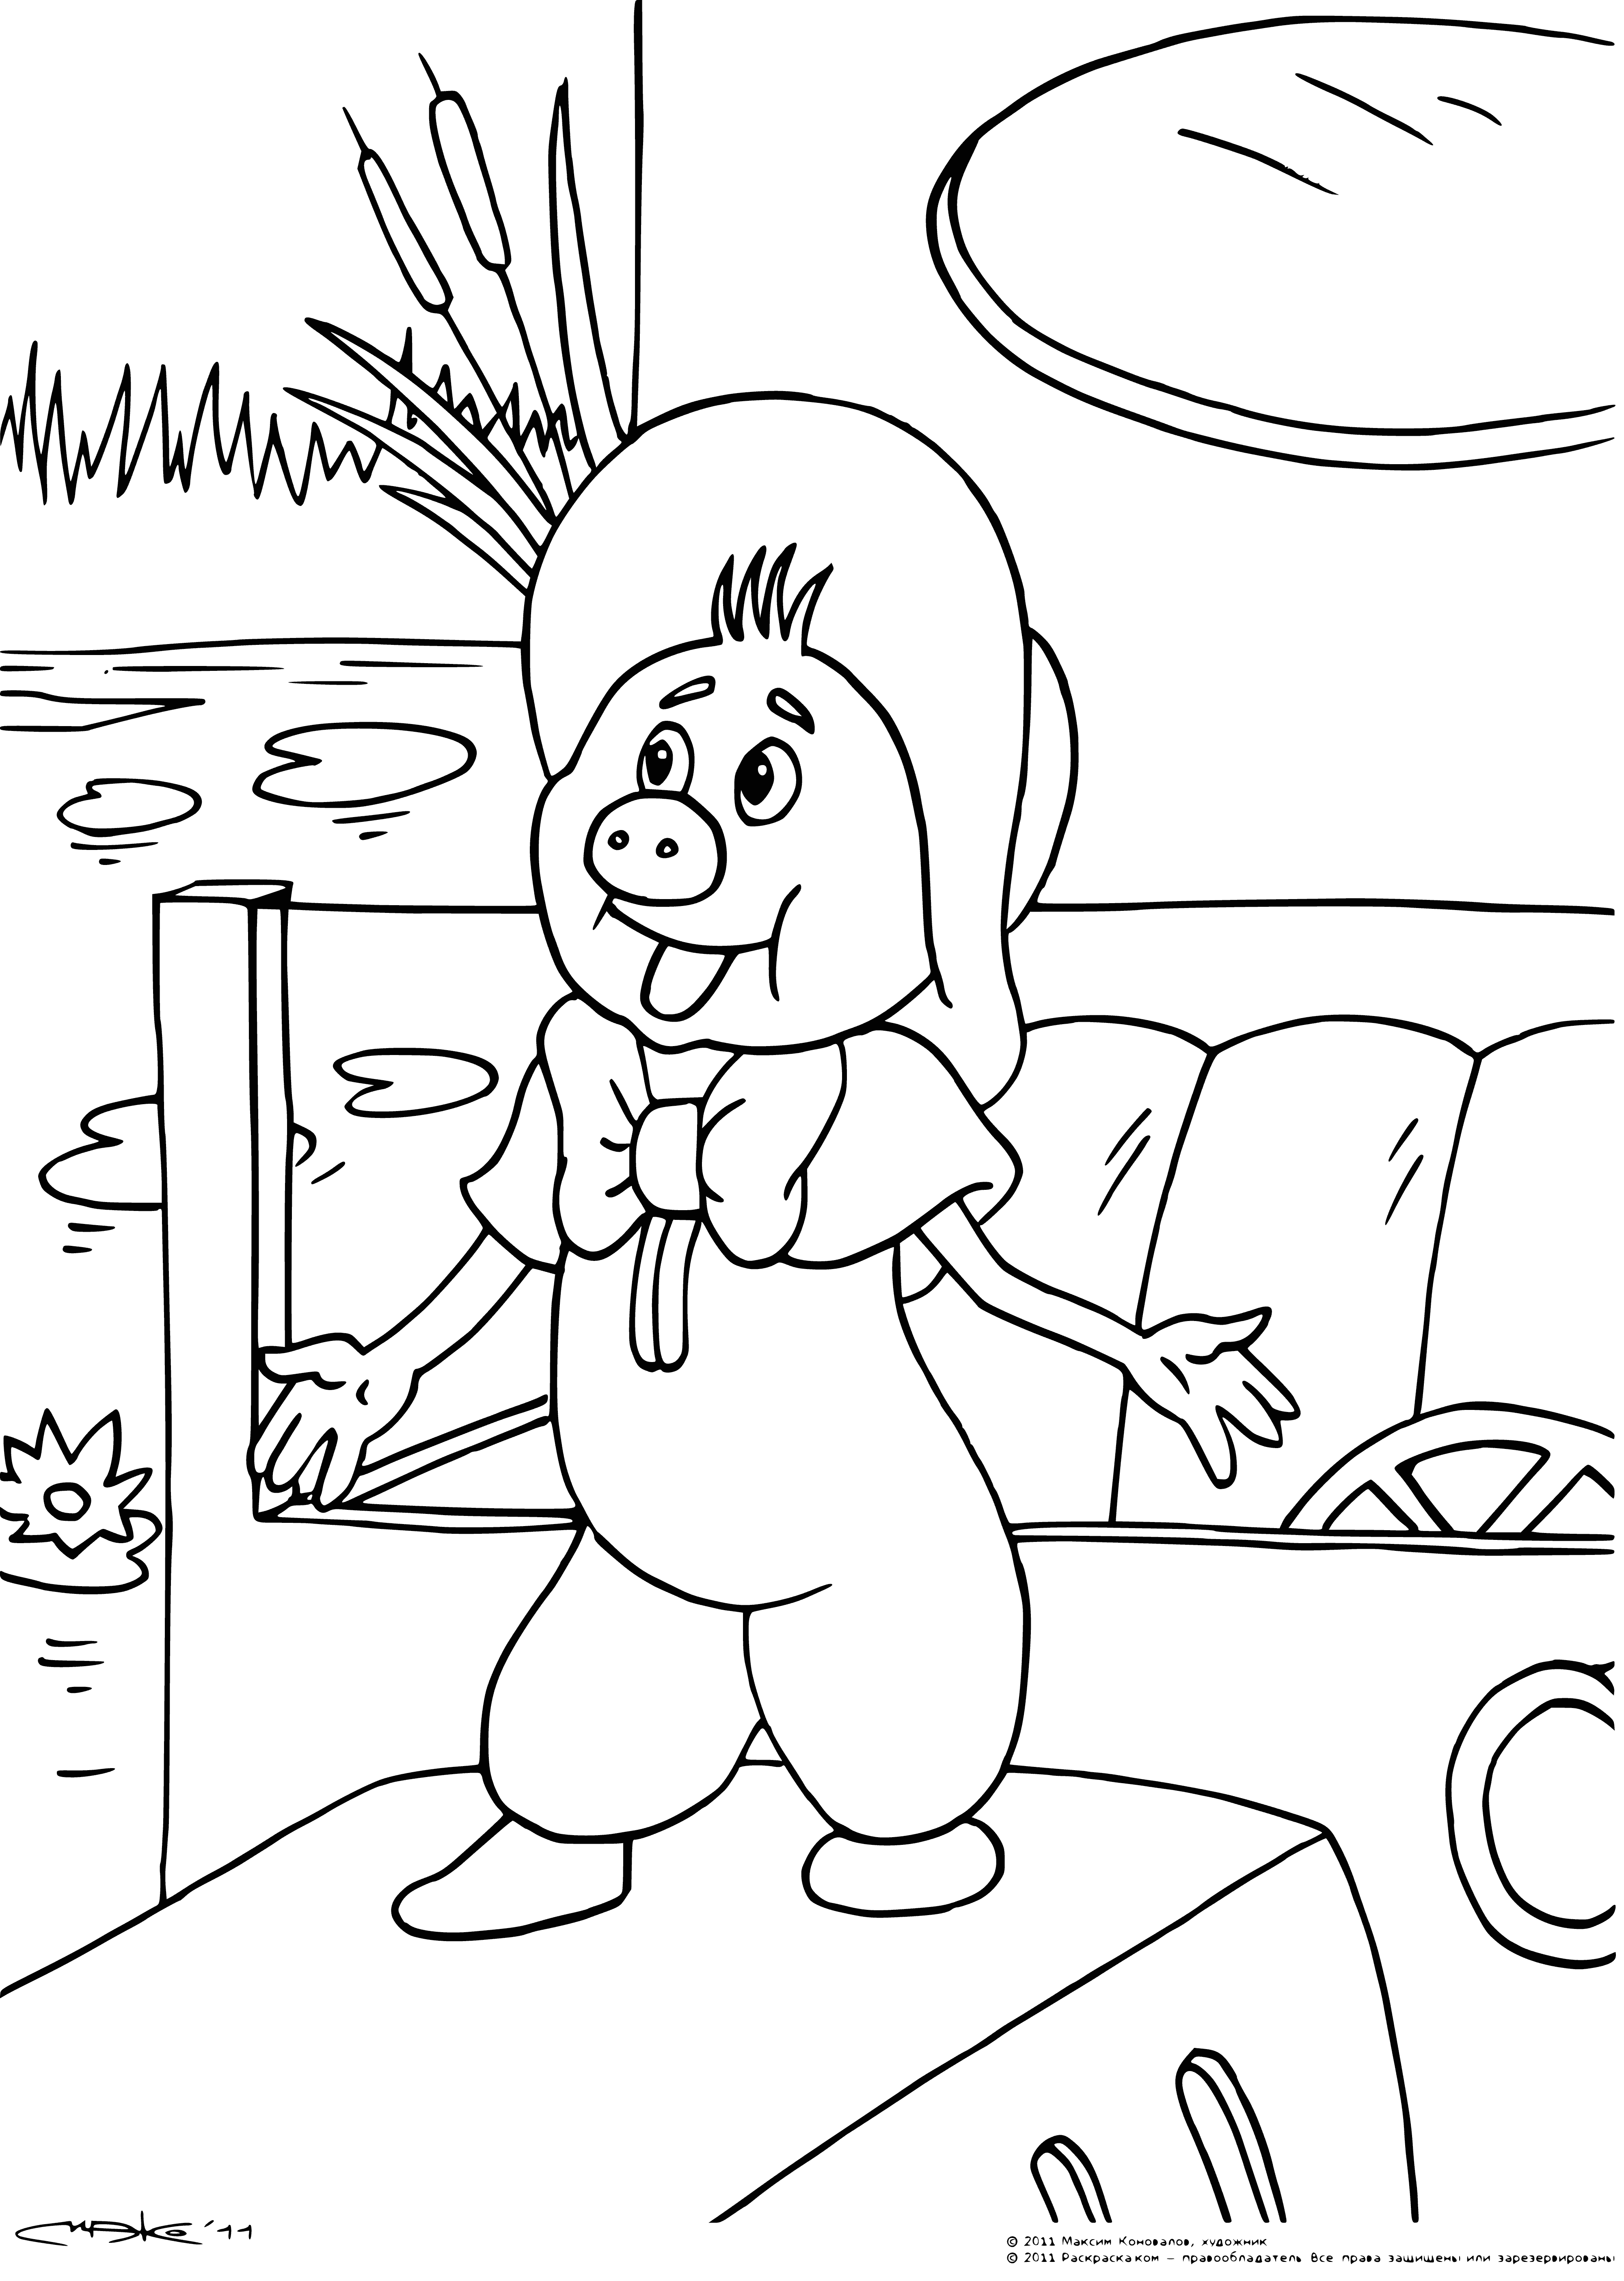 coloring page: Funtik is stuck in a tree and needs help. With the help of some color, can you get him down? #coloring #fun #adventures